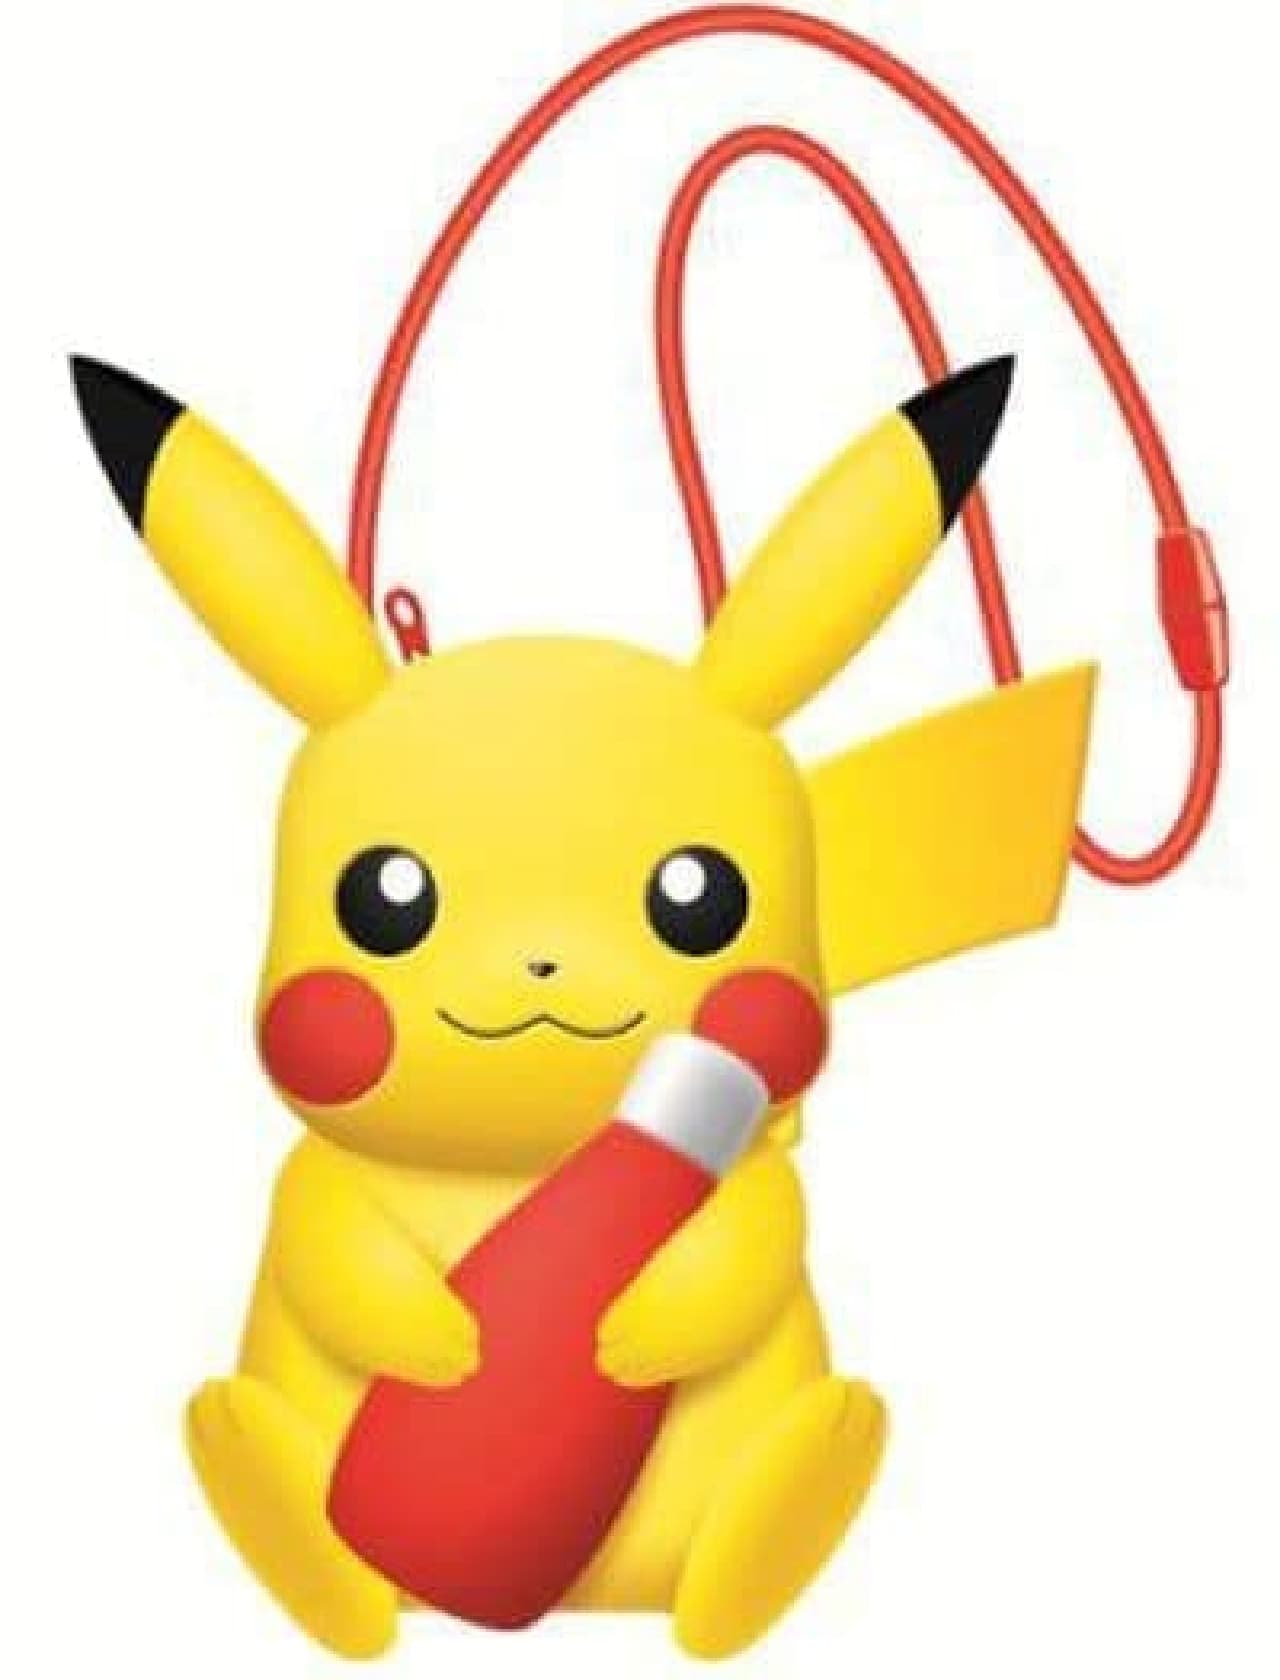 "Ketchup ni Muchu! Pokemon Campaign 2017 2nd" is a Pikachu limited goods when you purchase the target product